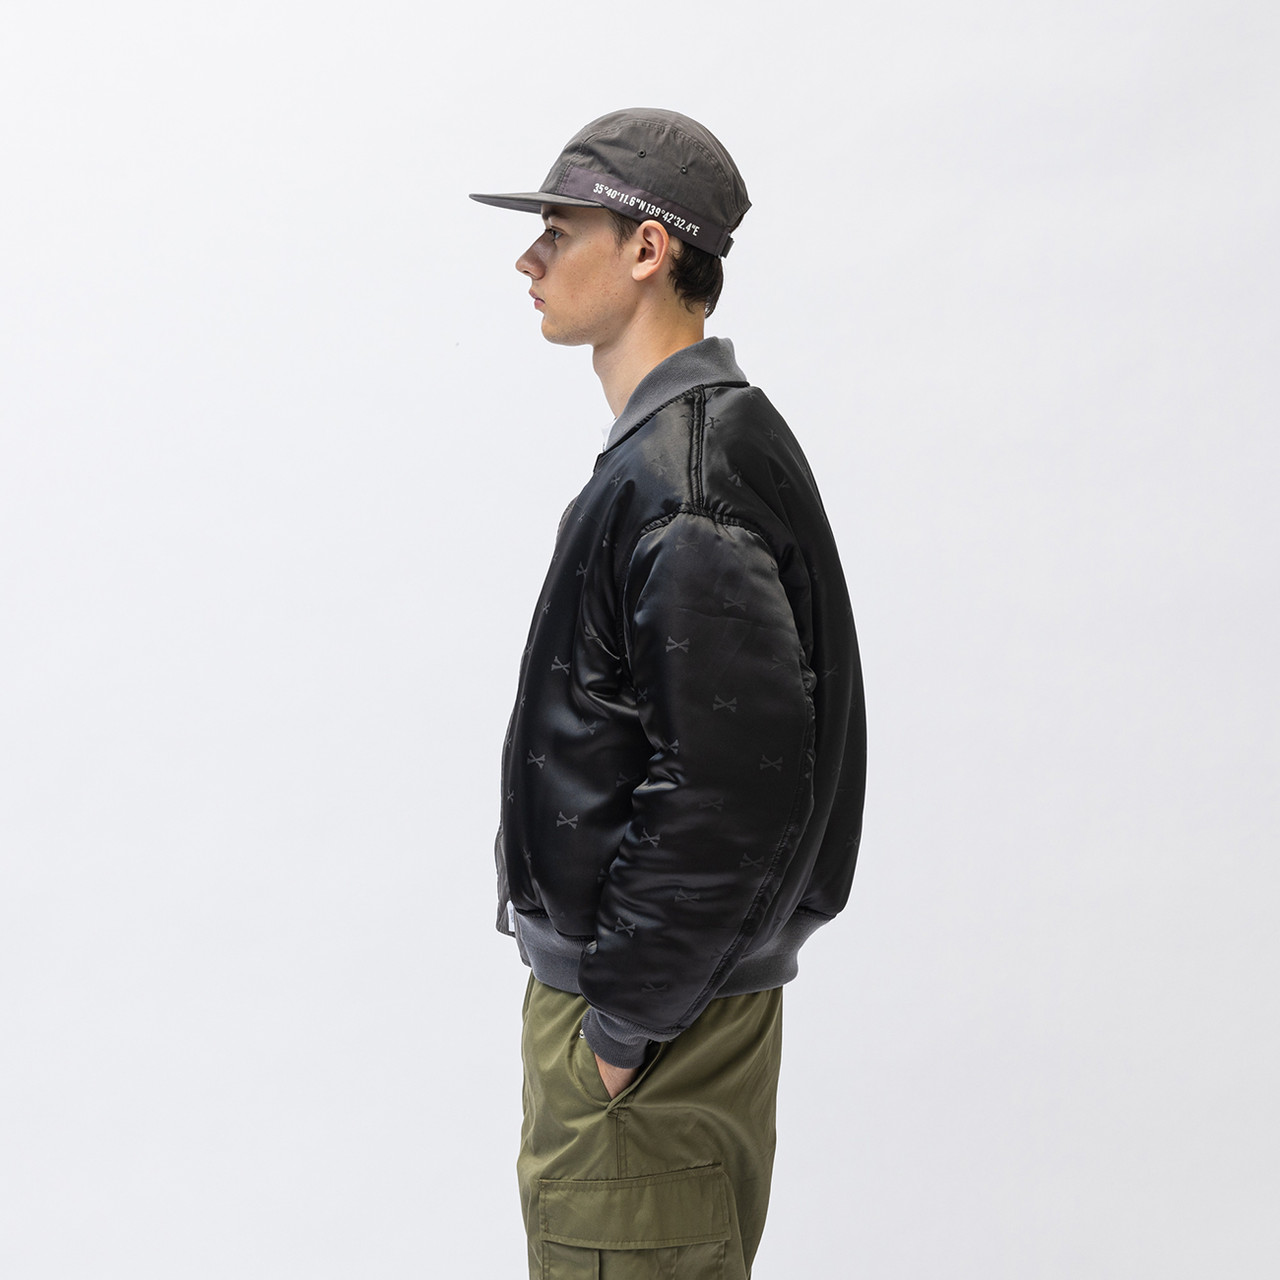 JFW-02 / JACKET / NYCO. WEATHER 232WVDT-JKM05